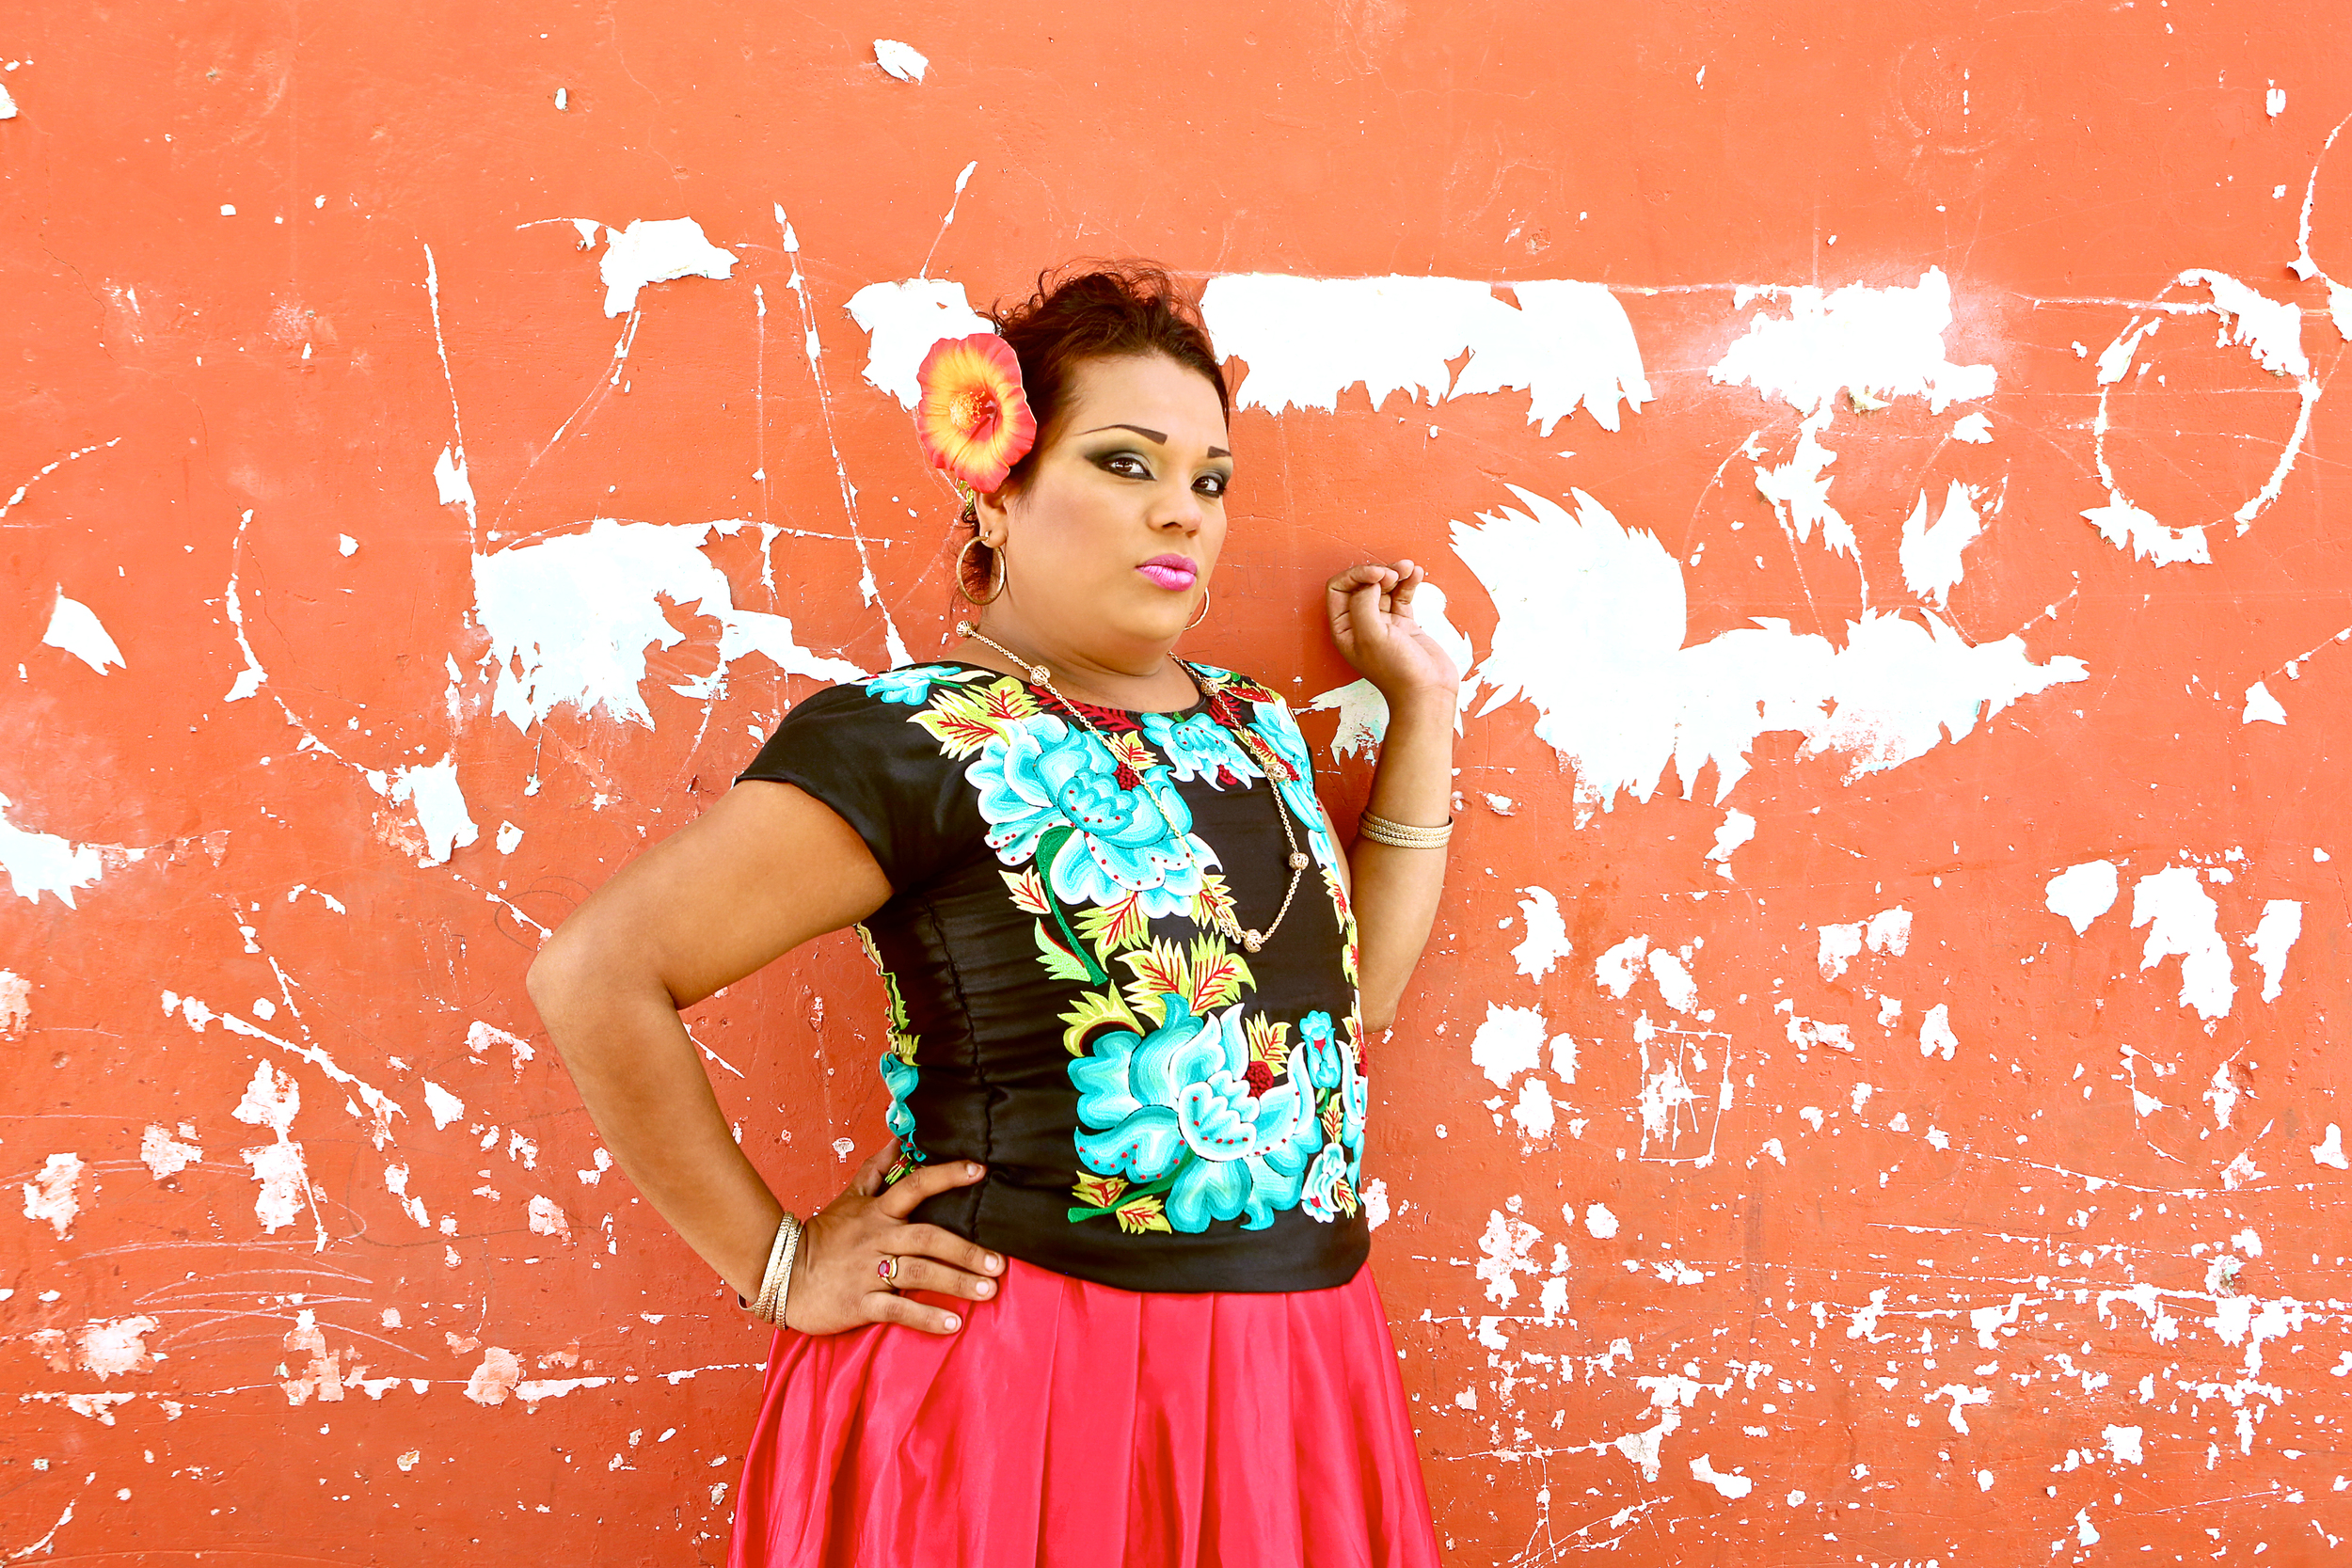  A photo documentary series of Mexico's transgendered Zapotecs  Involvement: Art direction,&nbsp;photography, post production 